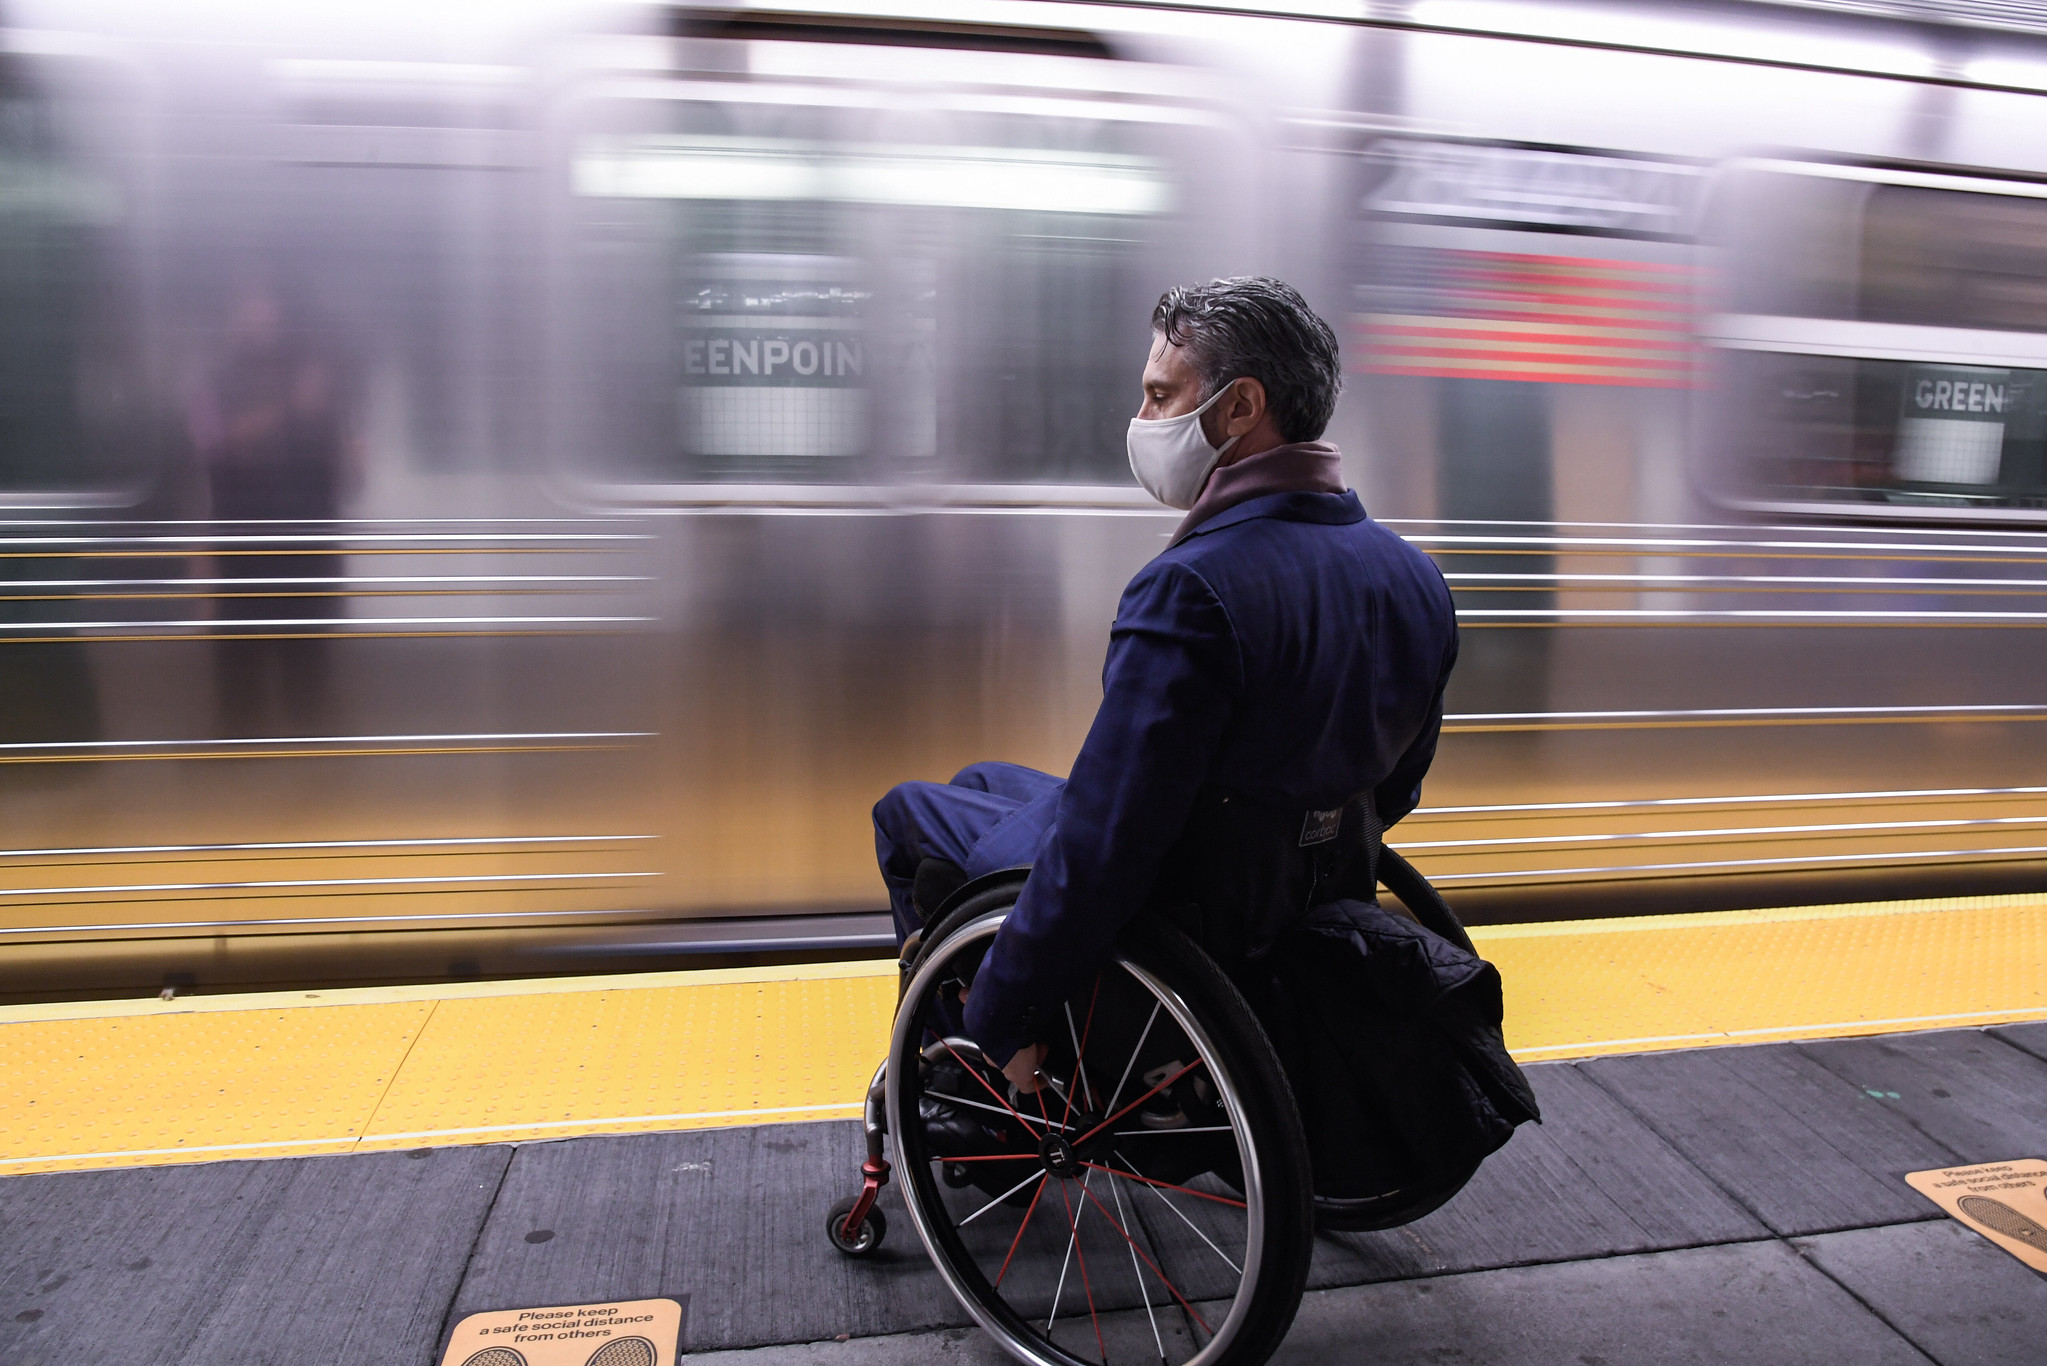 Man in Wheelcar on Platform in front of moving train